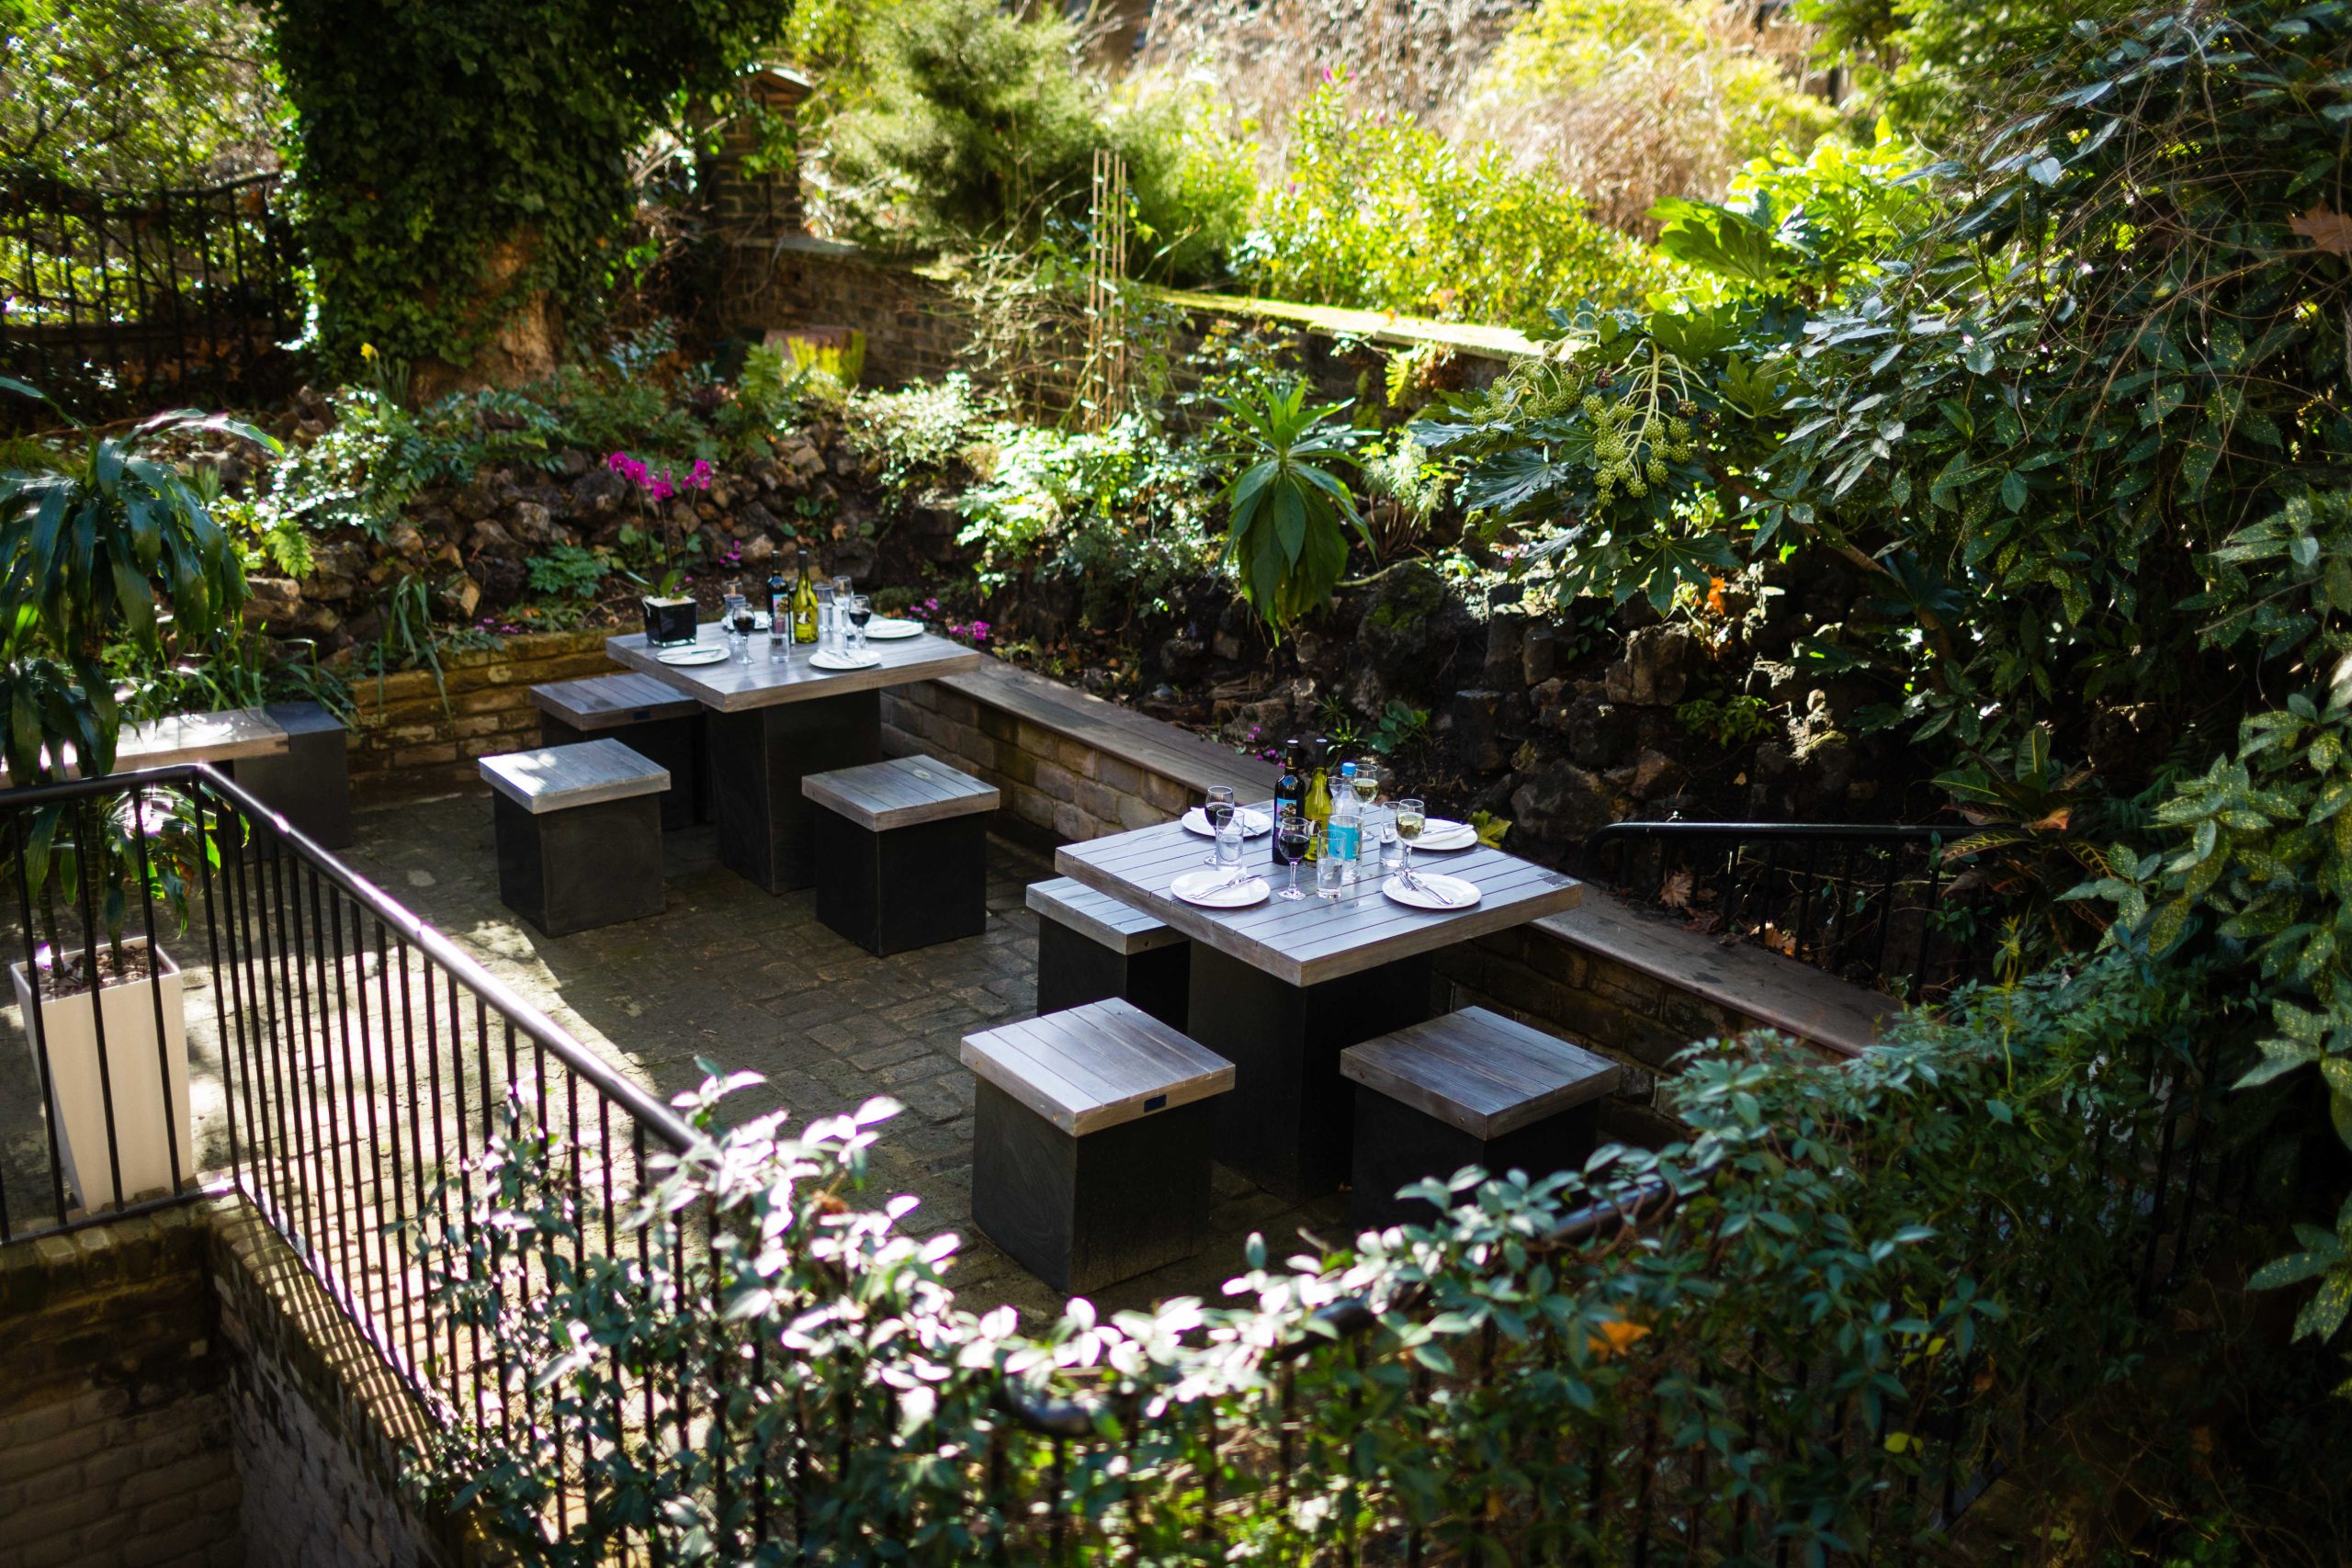 Photo of a garden with tables and chairs